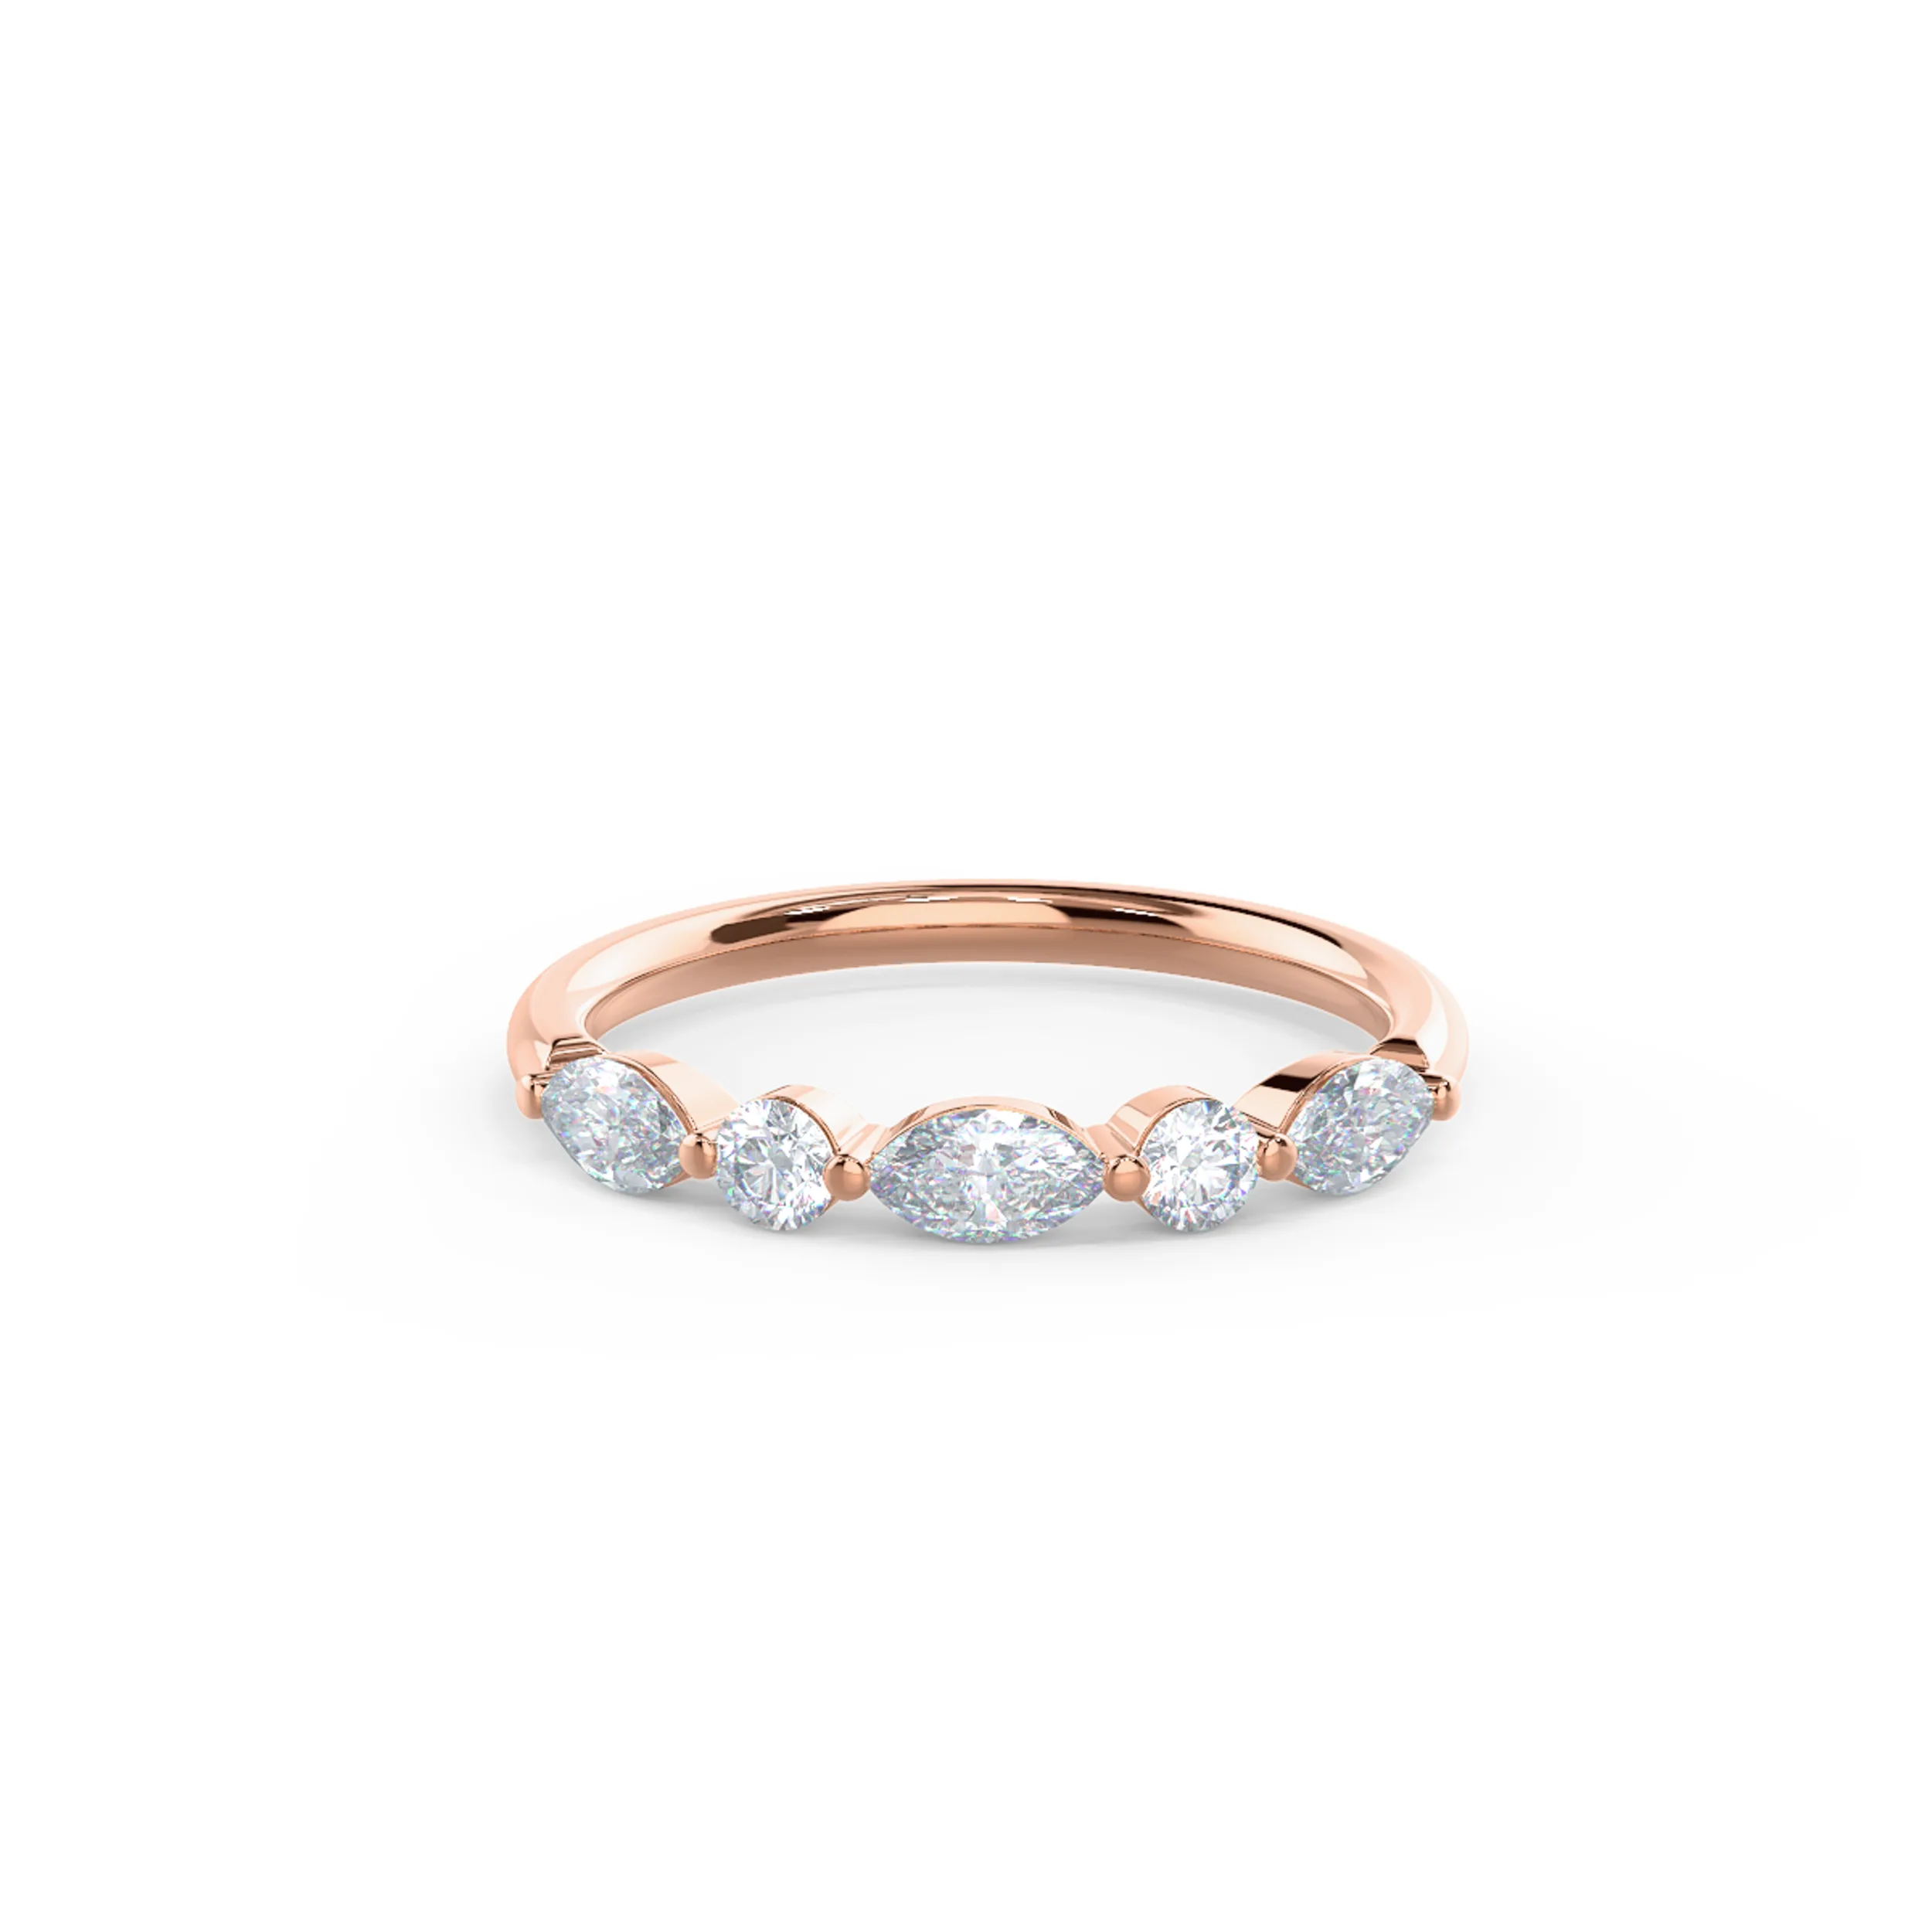 Hand Selected 0.6 Carat Lab Diamonds set in 14 Karat Rose Gold Marquise and Round East-West Five Stone (Main View)